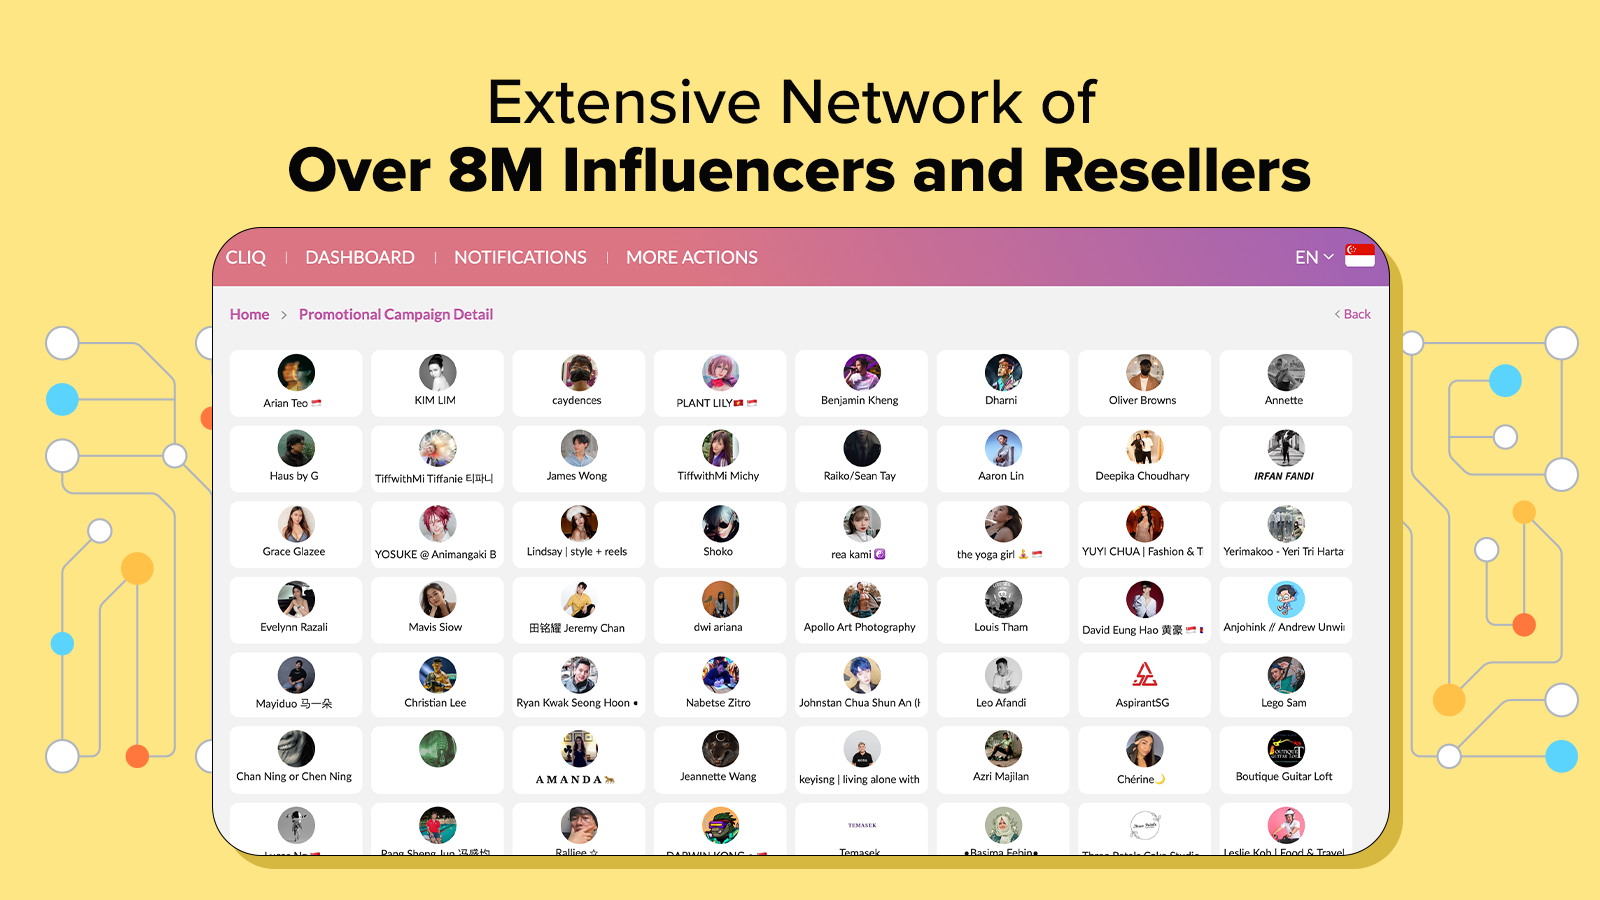 Extensive Network of Over 8M Influencers and Resellers